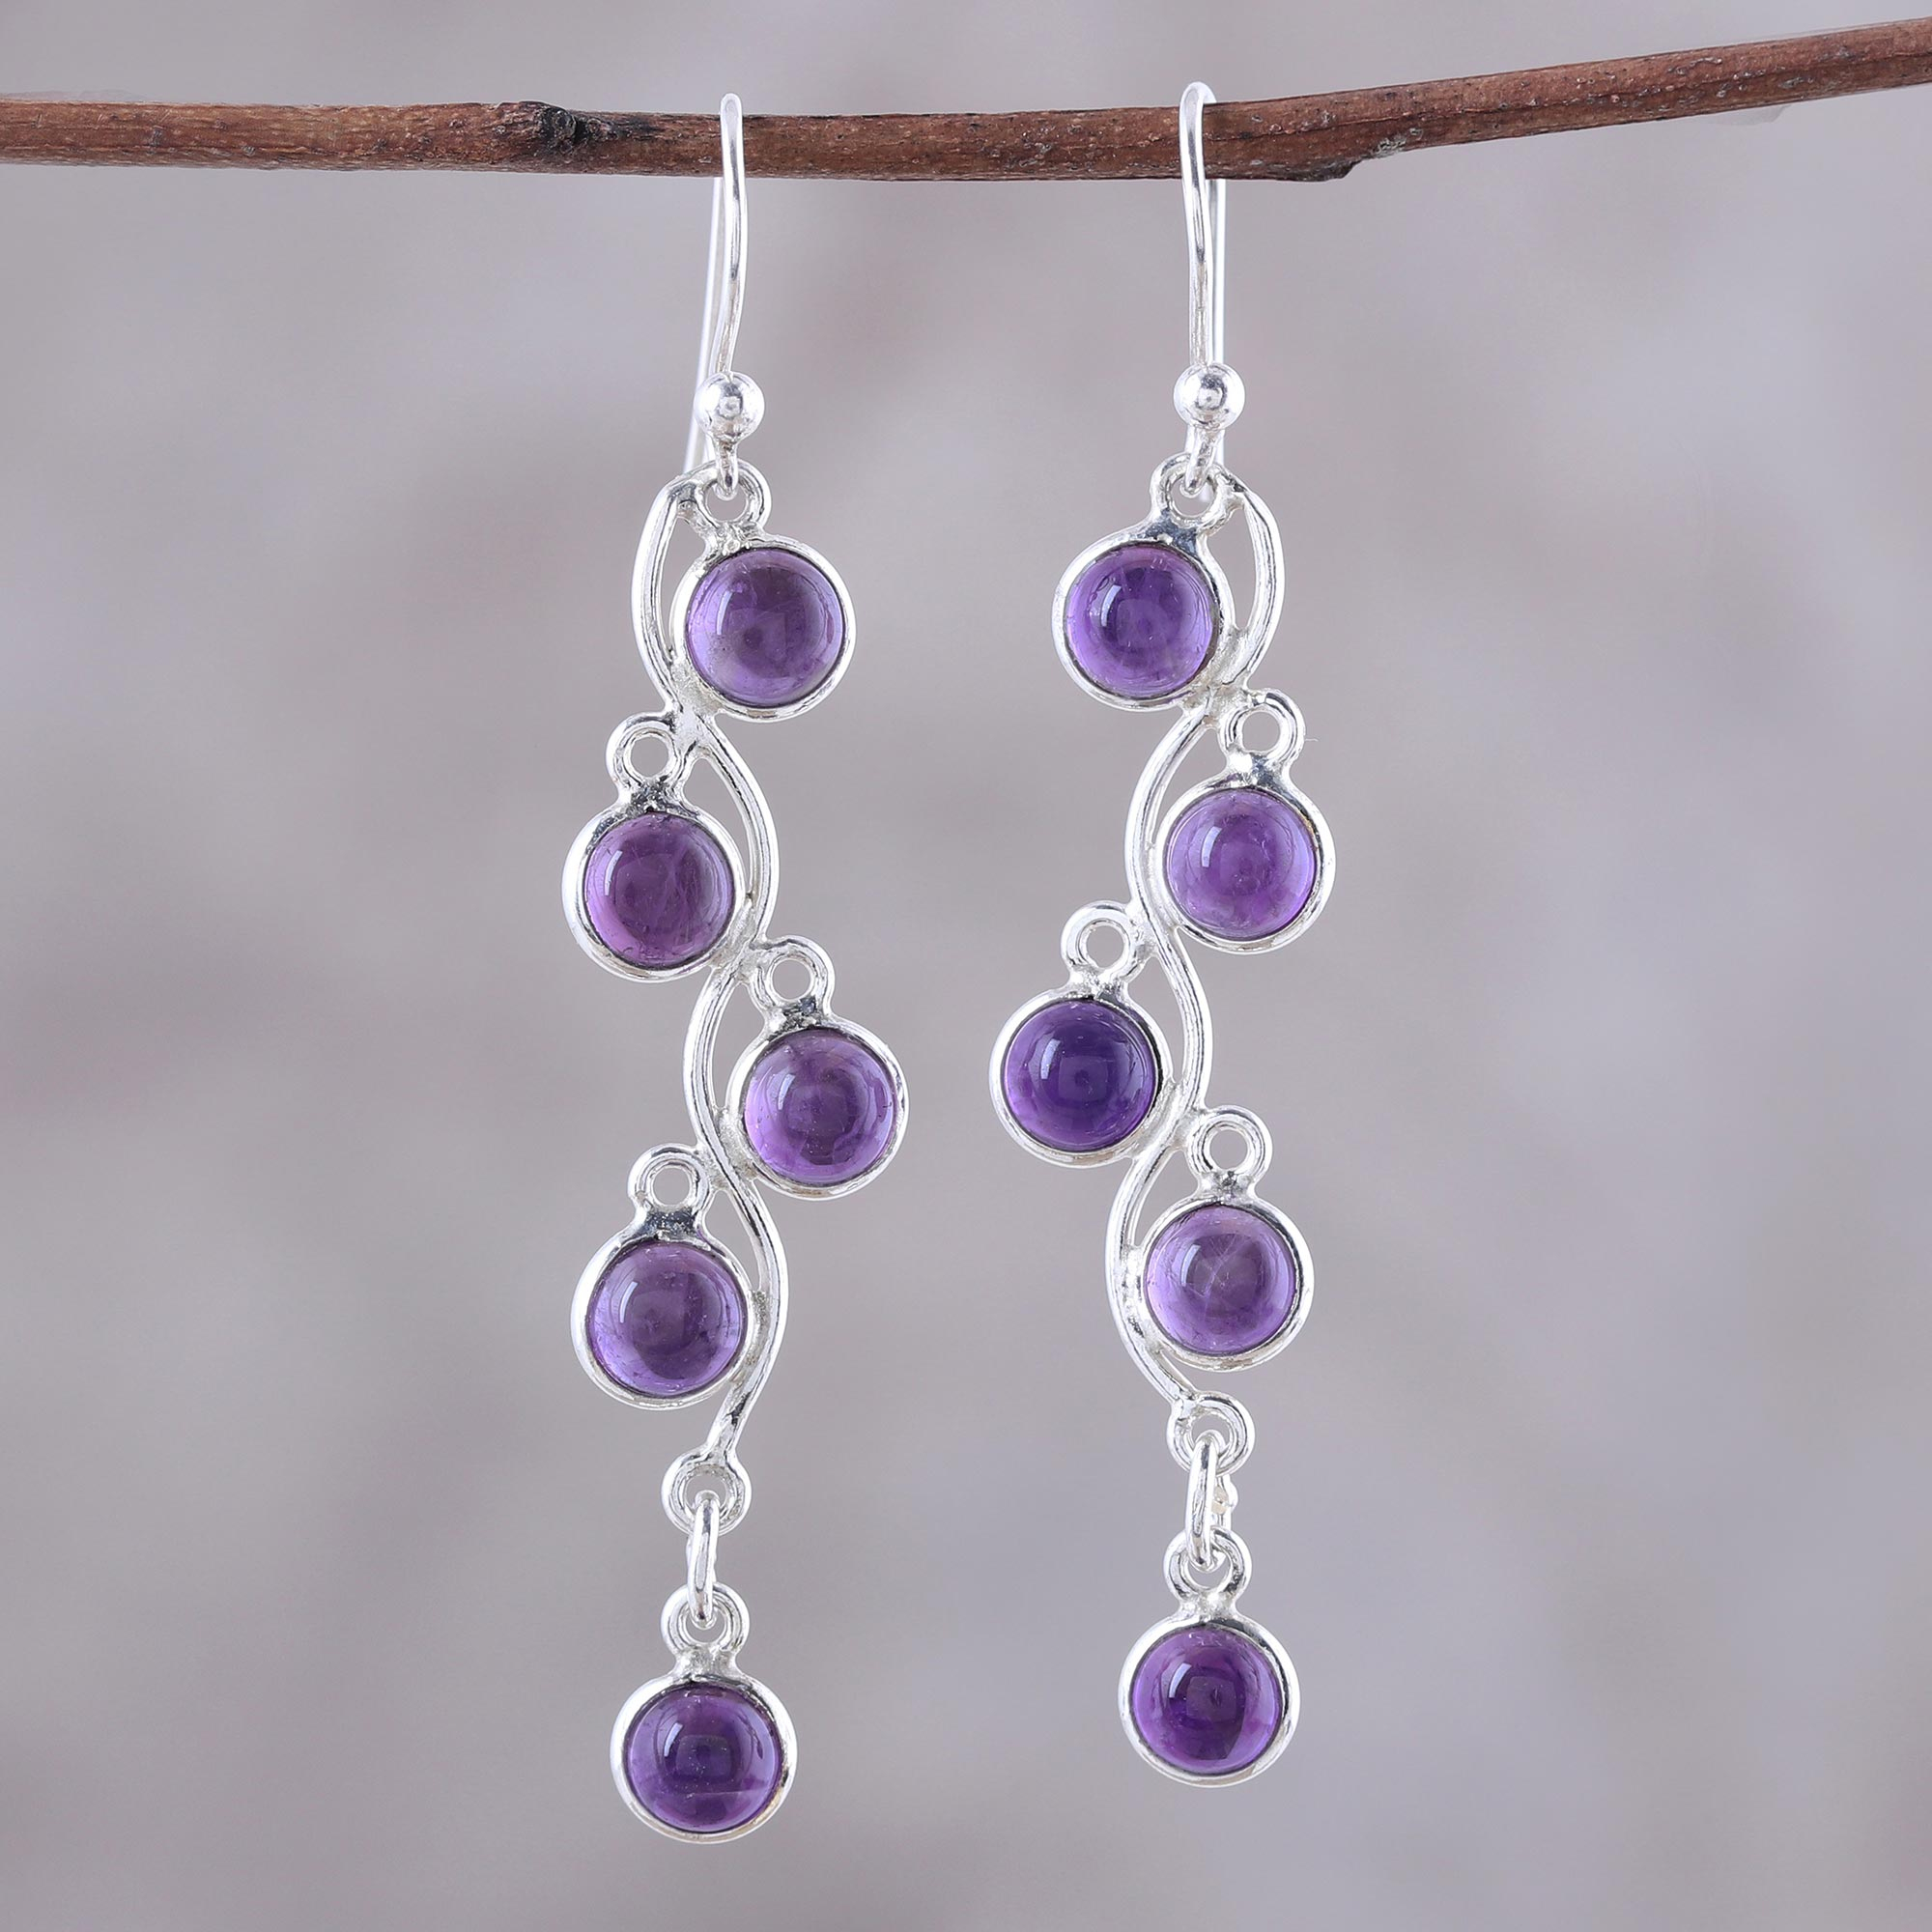 Sterling Silver and Amethyst Dangle Earrings from India - Juicy Vine |  NOVICA